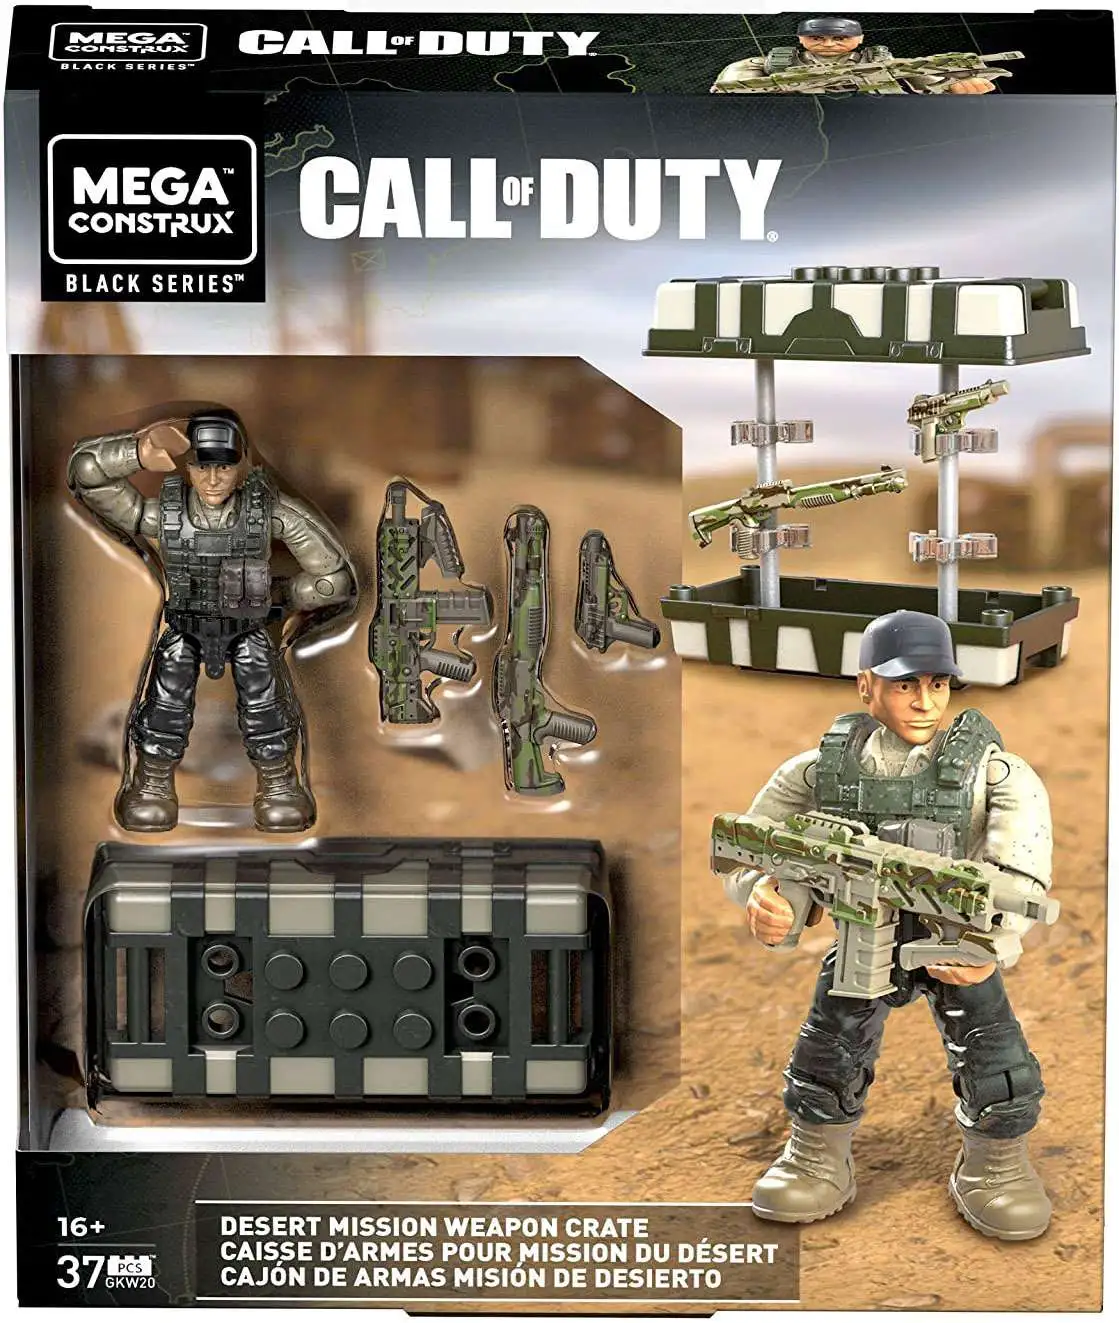 Call of Duty Desert Mission Weapon Crate GKW20 MEGA Construx Figure for sale online 